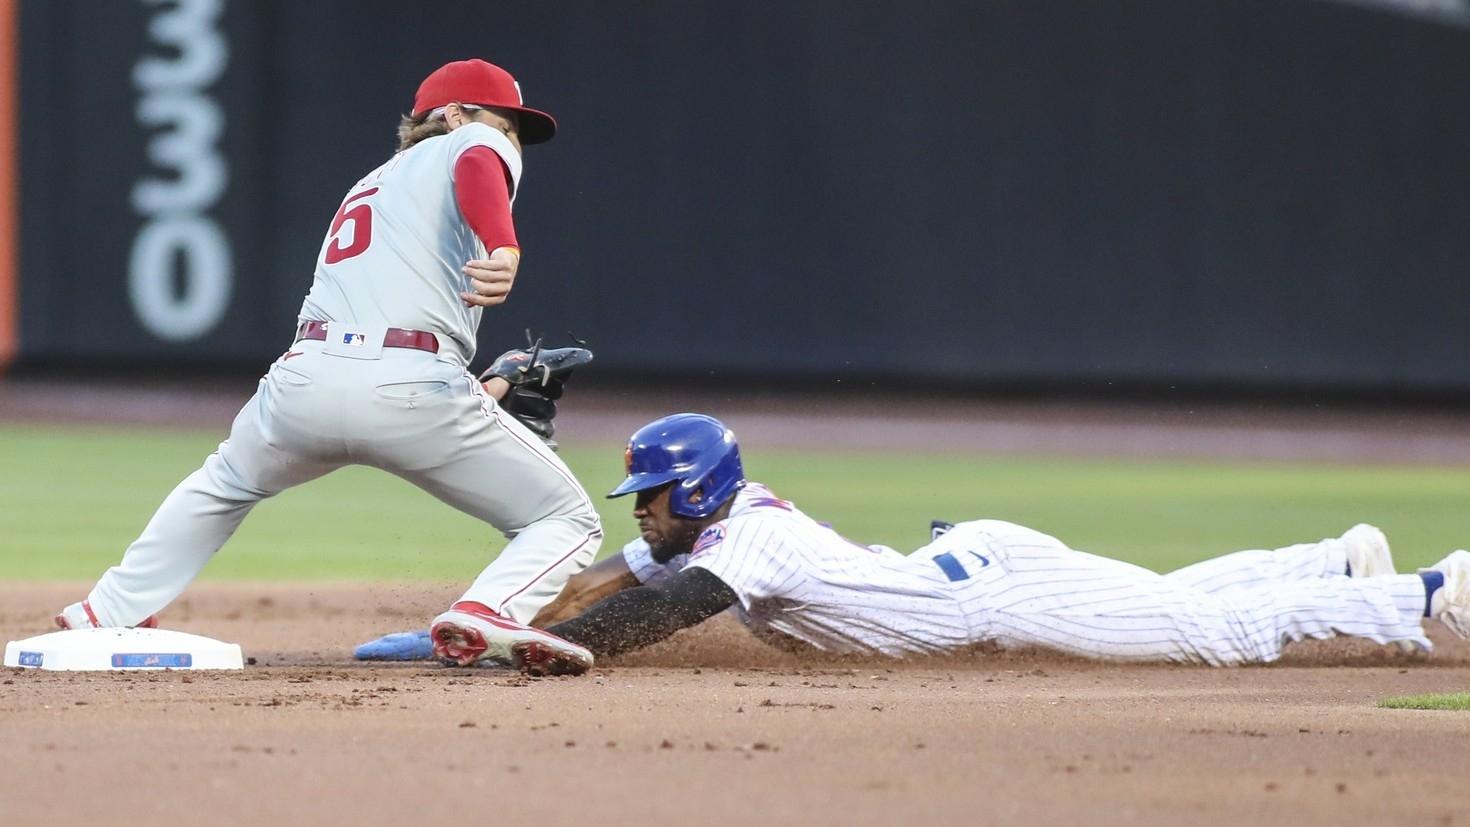 Philadelphia Phillies shortstop Bryson Stott (5) is unable to handle the throw allowing New York Mets right fielder Starling Marte (6) to steal second base in the first inning at Citi Field. / Wendell Cruz-USA TODAY Sports